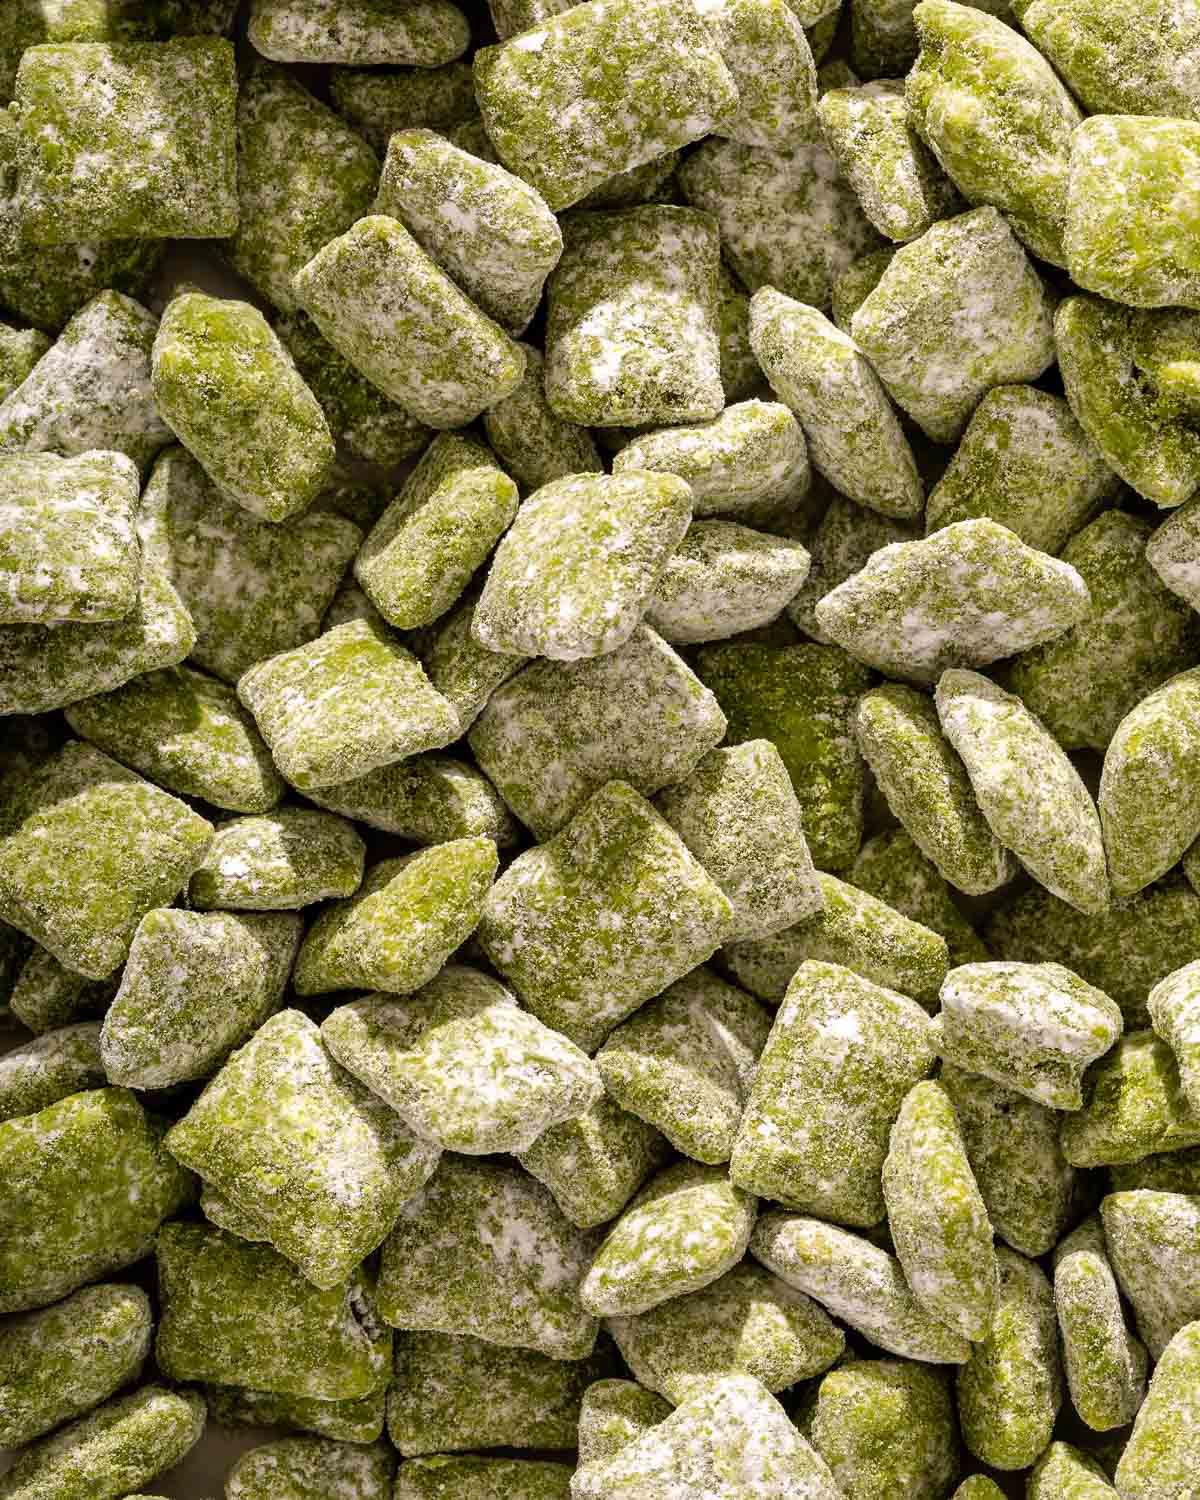 Up close of a pile of matcha puppy chow.